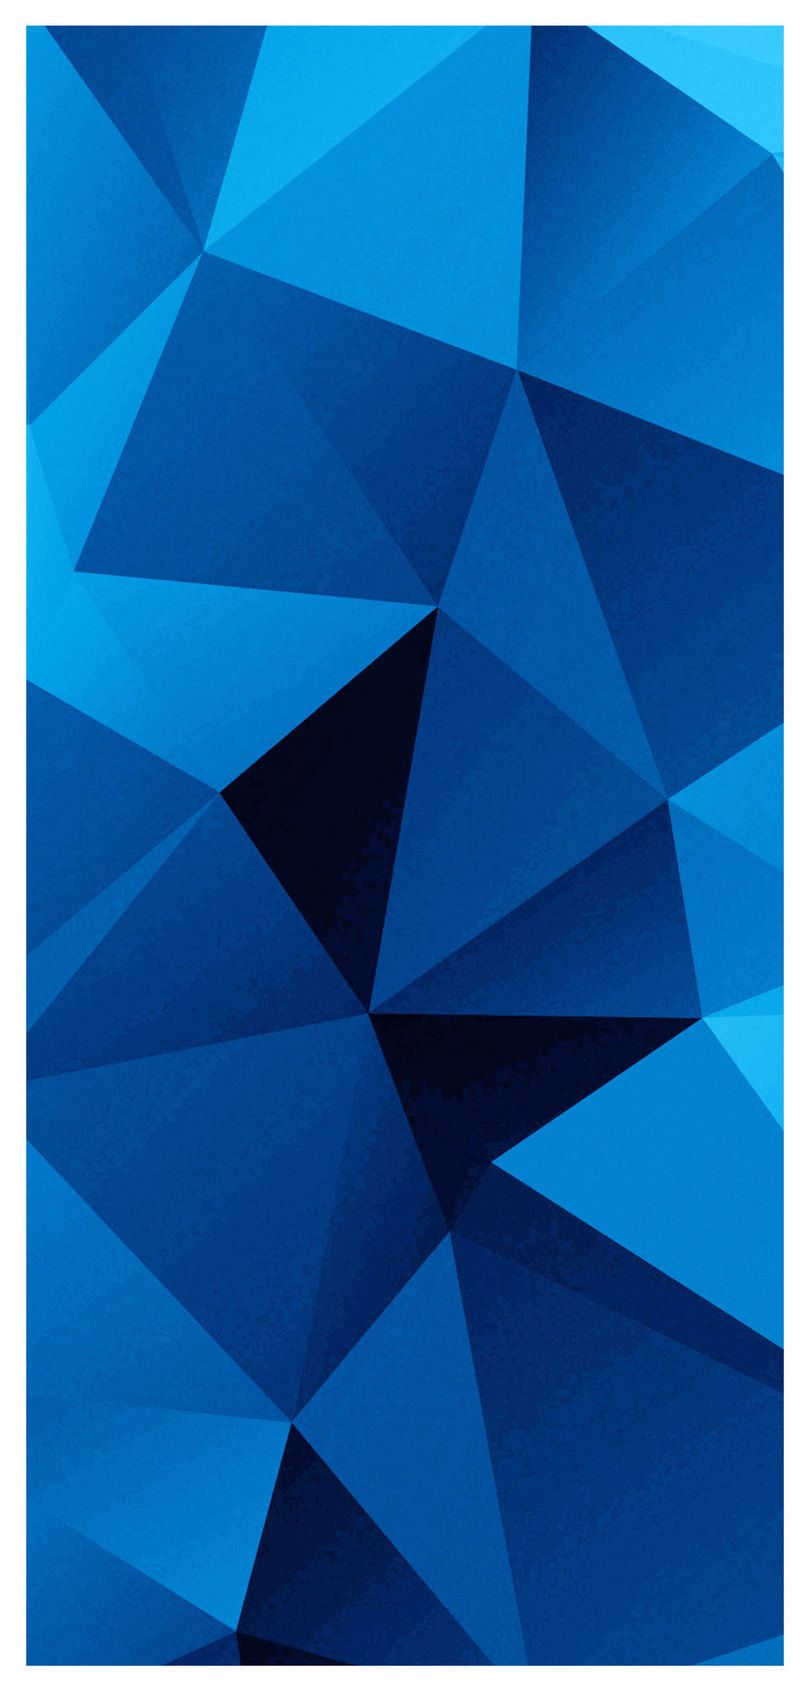 blue geometry mobile phone wallpaper background image free